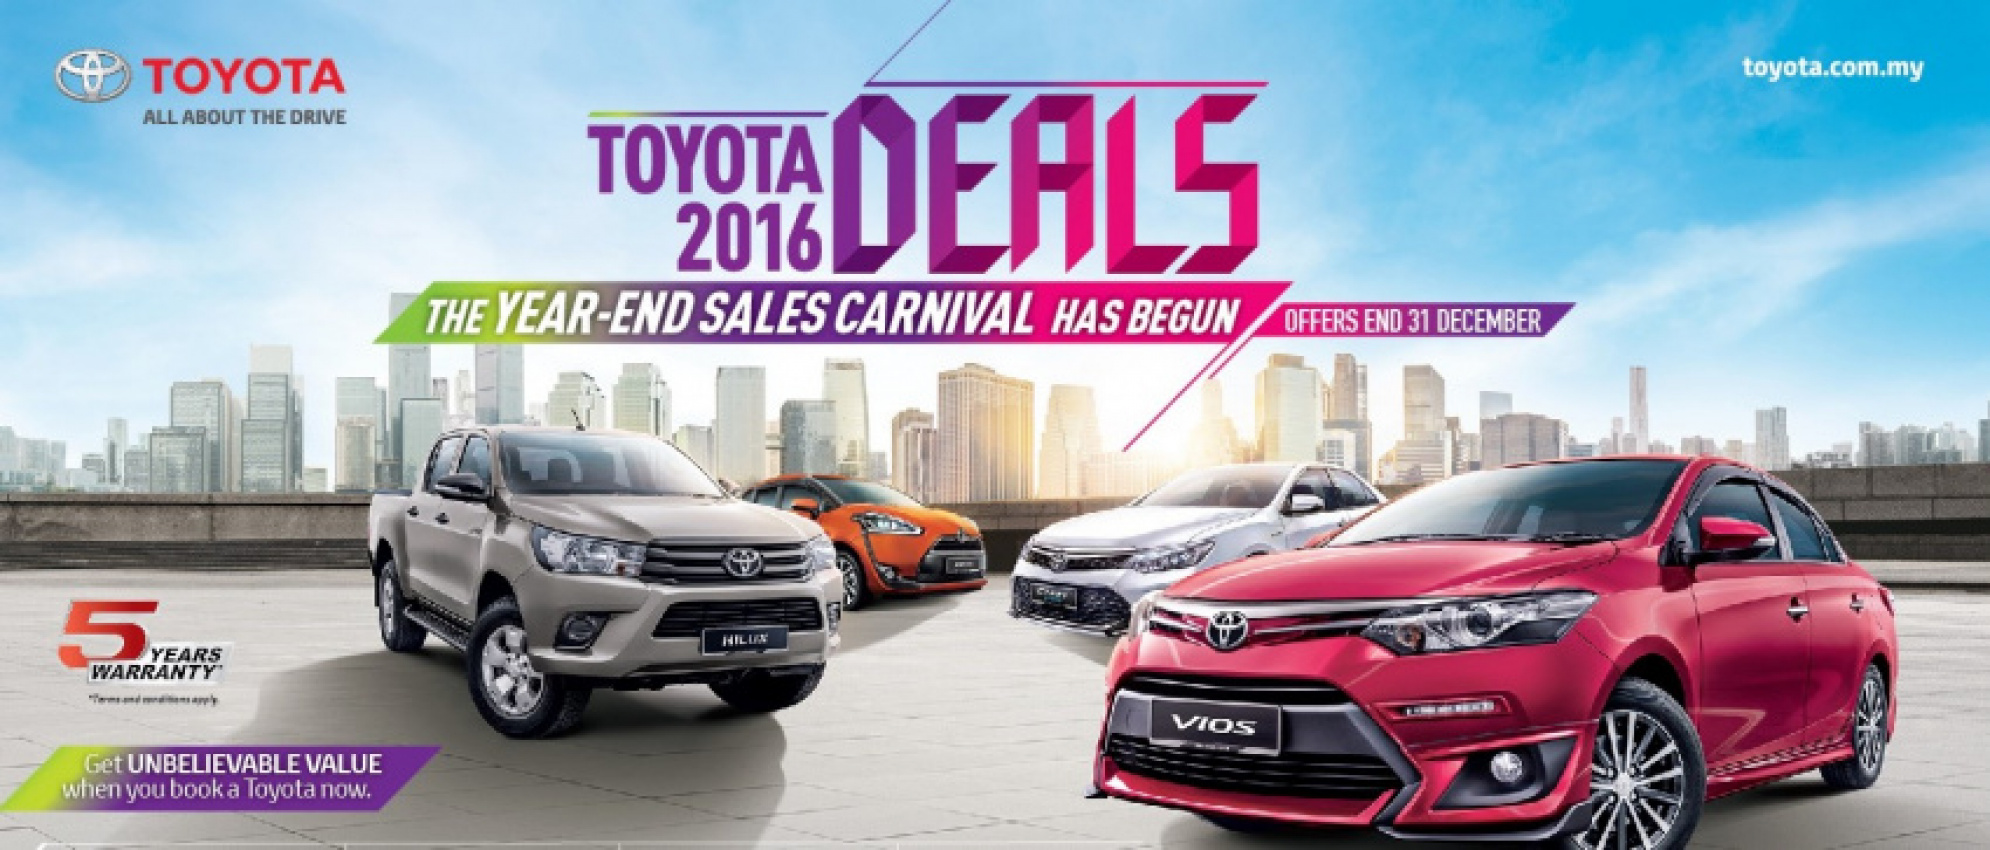 autos, car brands, cars, toyota, umw toyota, 2016 toyota year-end sales carnival